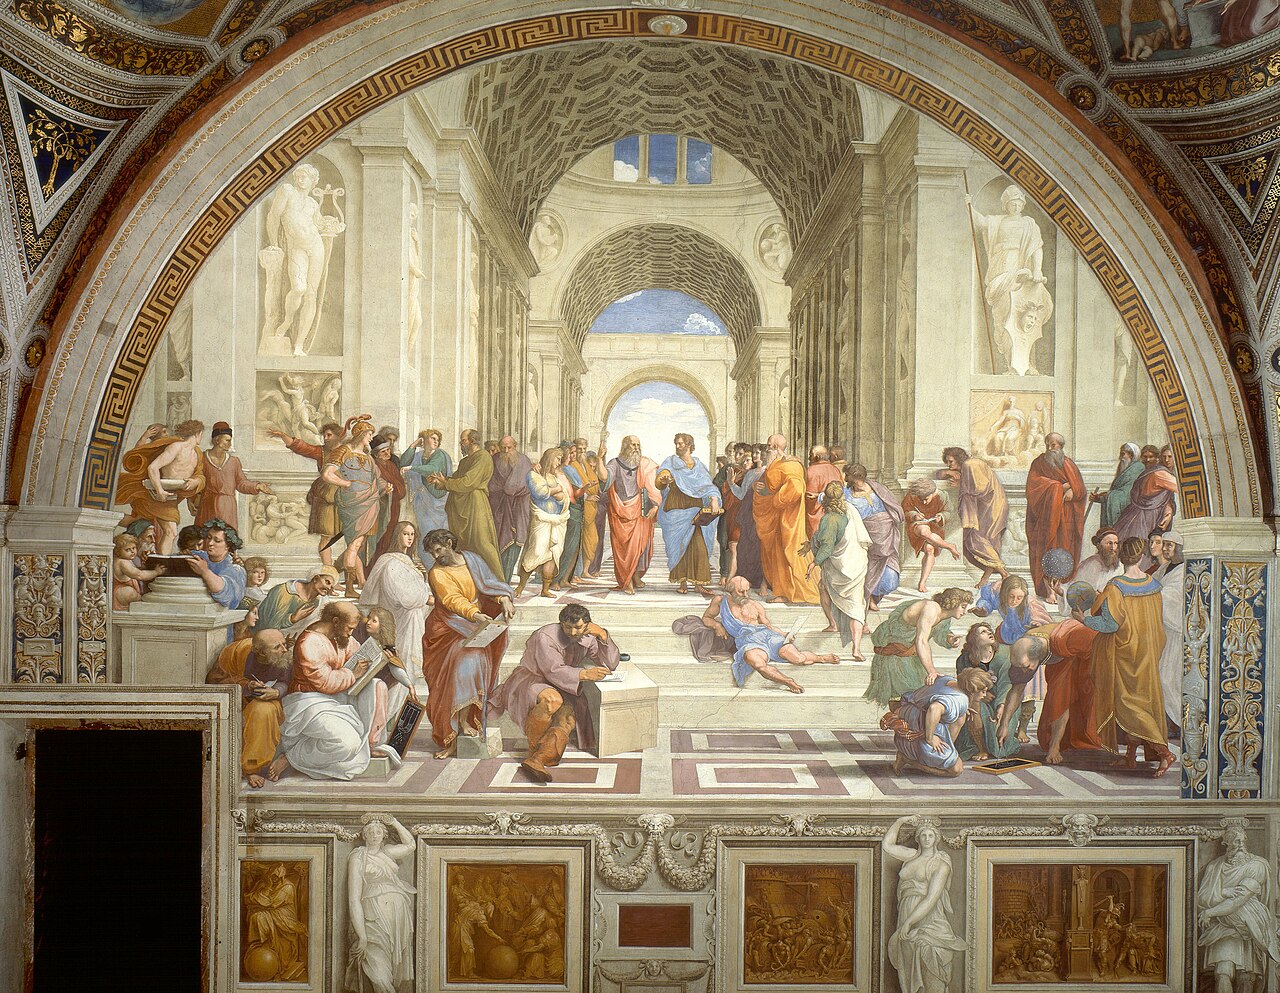 A large Renaissance-era painting depicts dozens of individuals clad in long robes of different colors, conferring in small groups, in a large marbe hall, beneath a domed ceiling and amid marble statues.